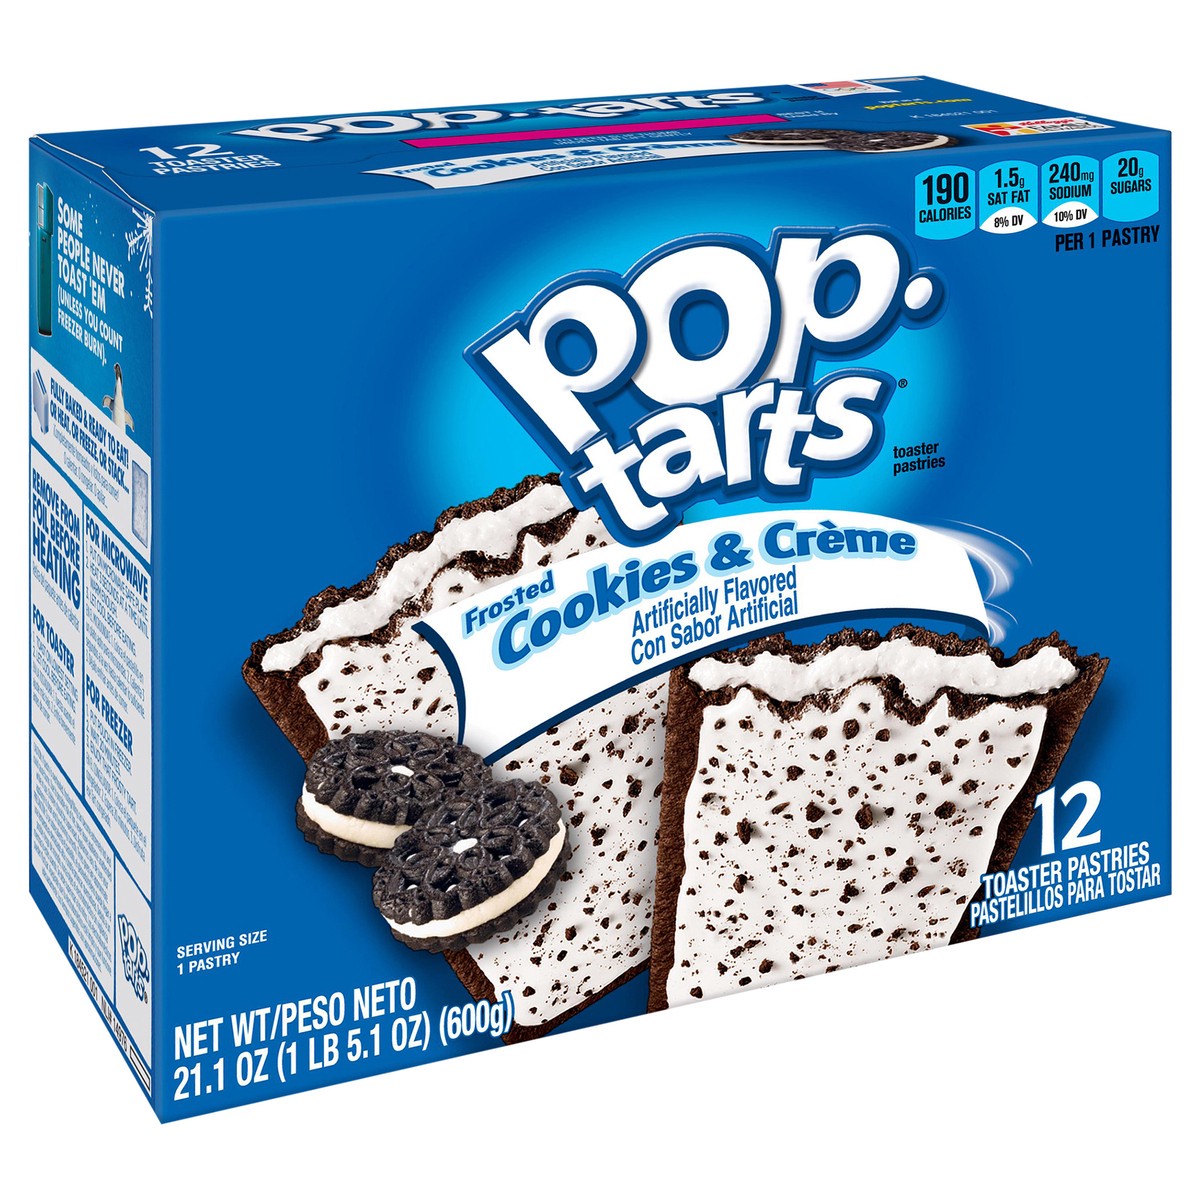 slide 2 of 10, Pop-Tarts Kellogg's Pop-Tarts Frosted Cookies & Creme Pastries, 12 ct